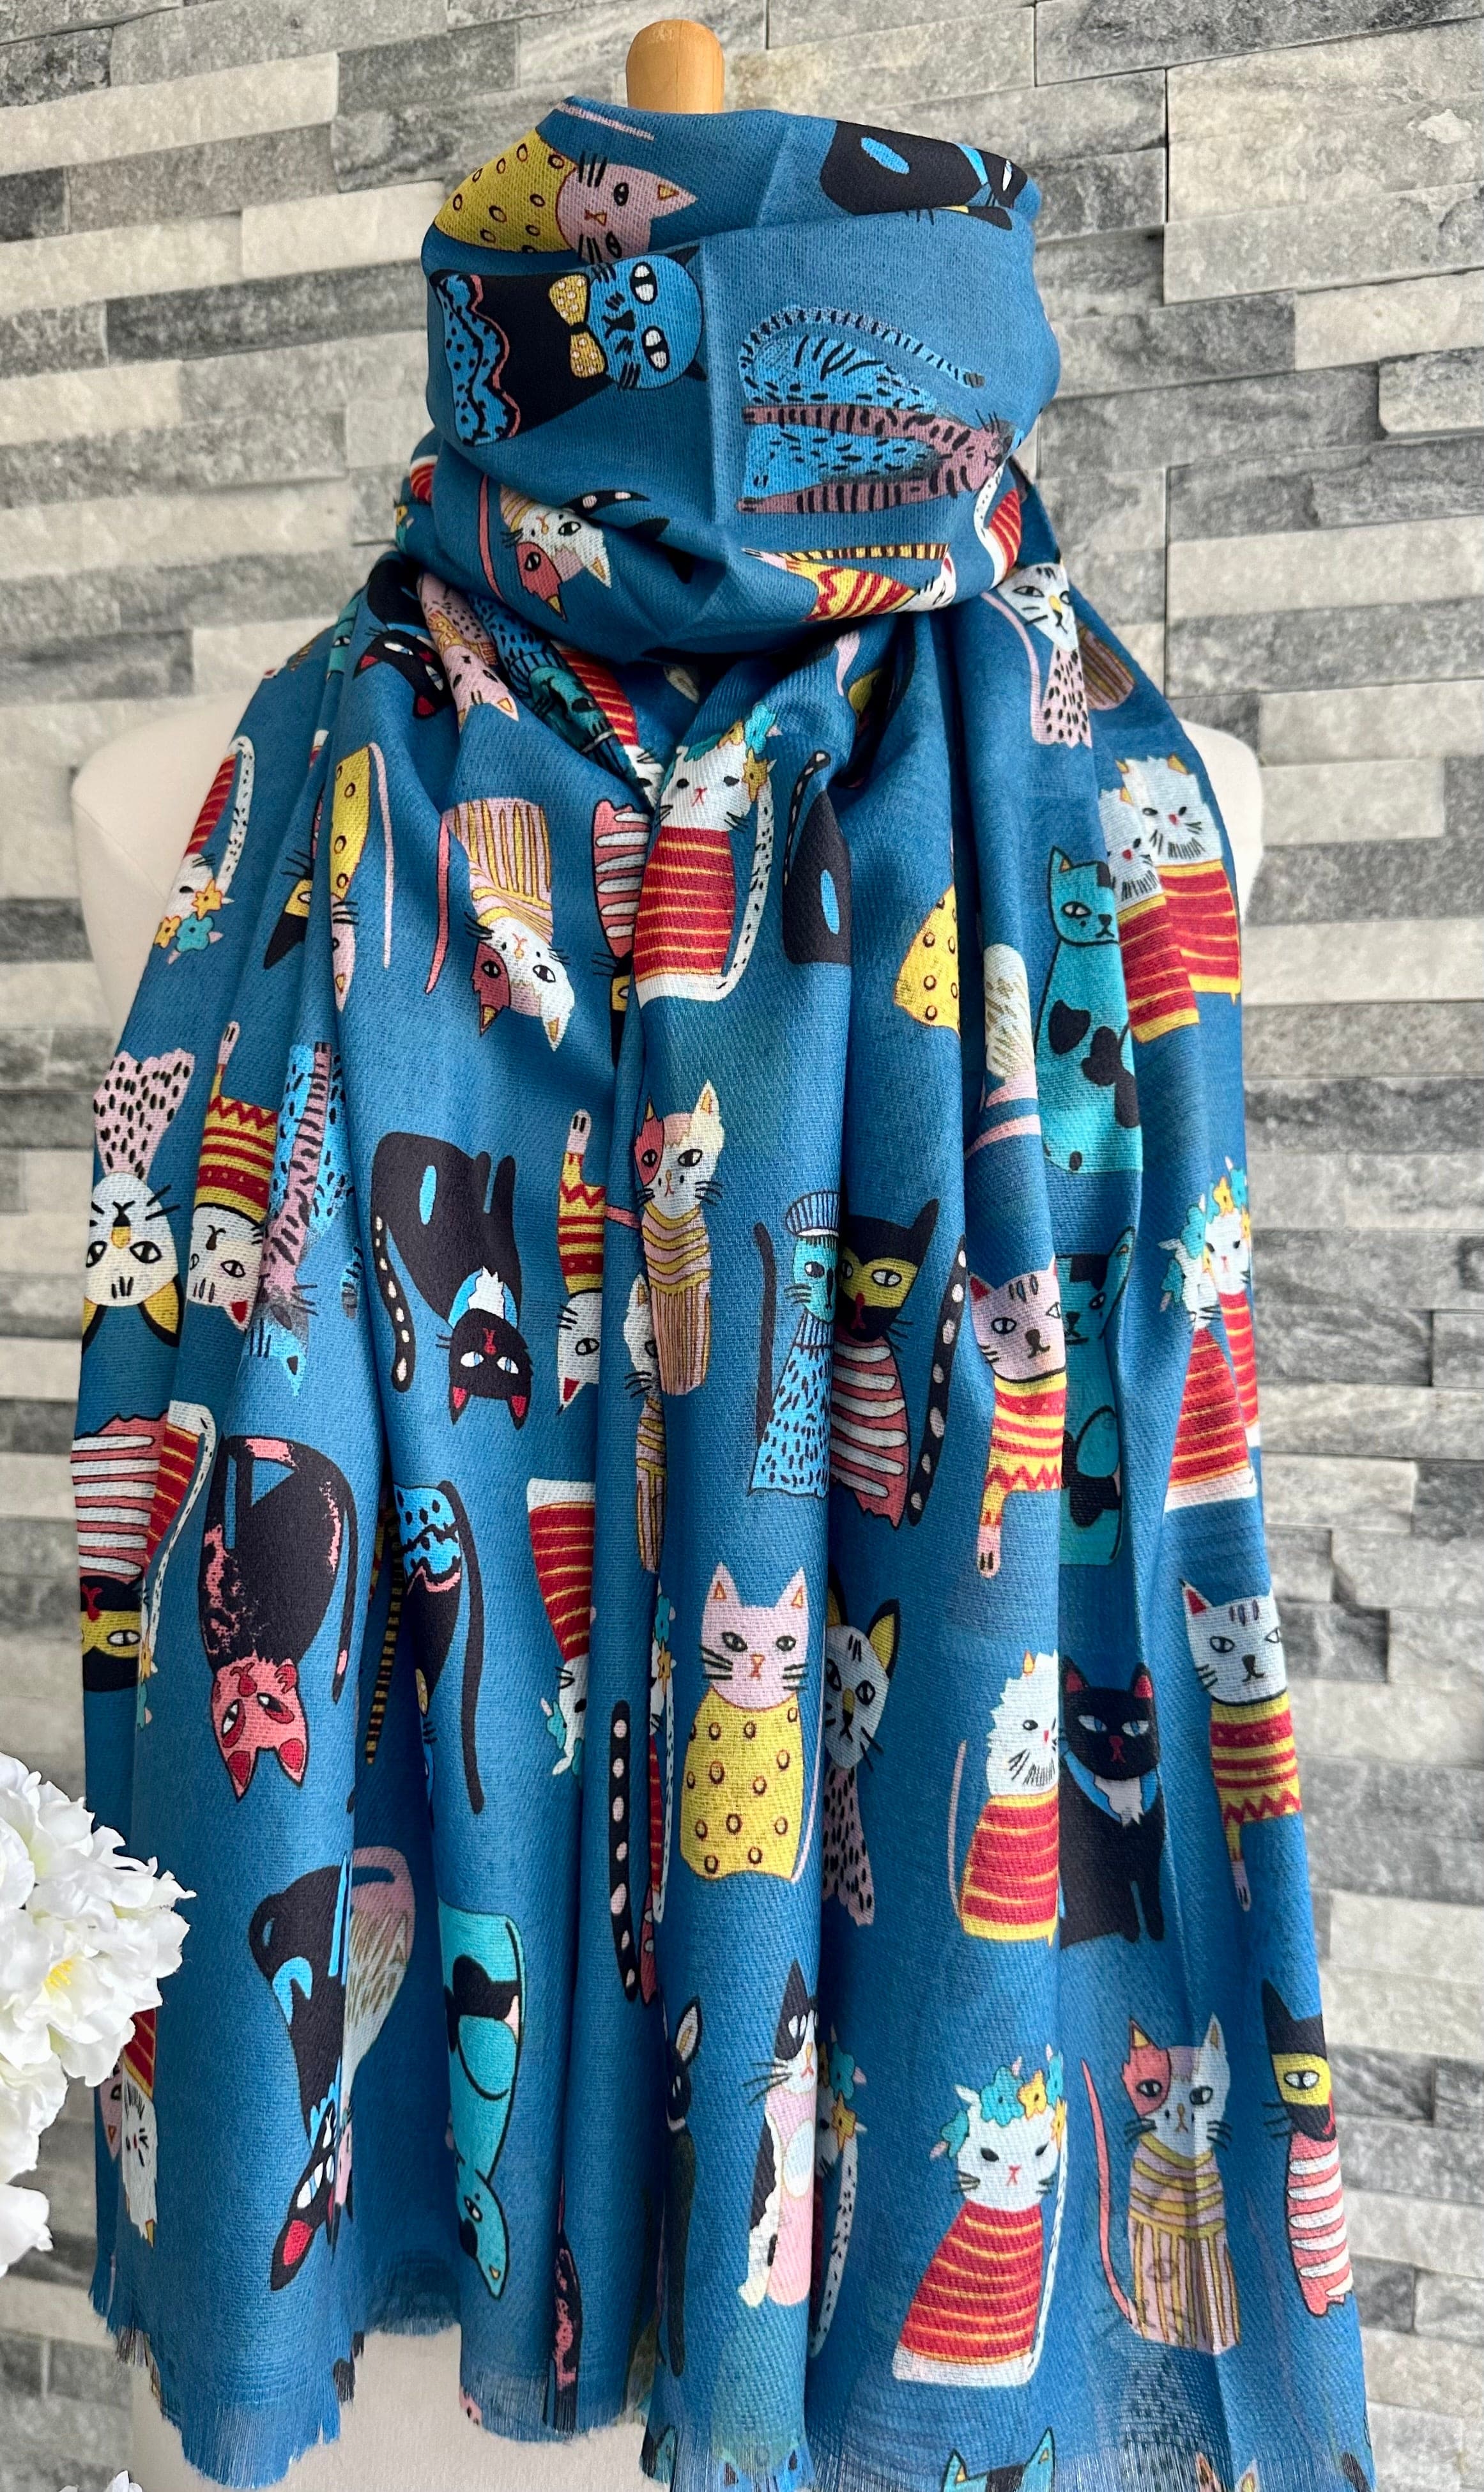 lusciousscarves Ladies Blue Scarf with Colourful Cats Design, Cotton Blend